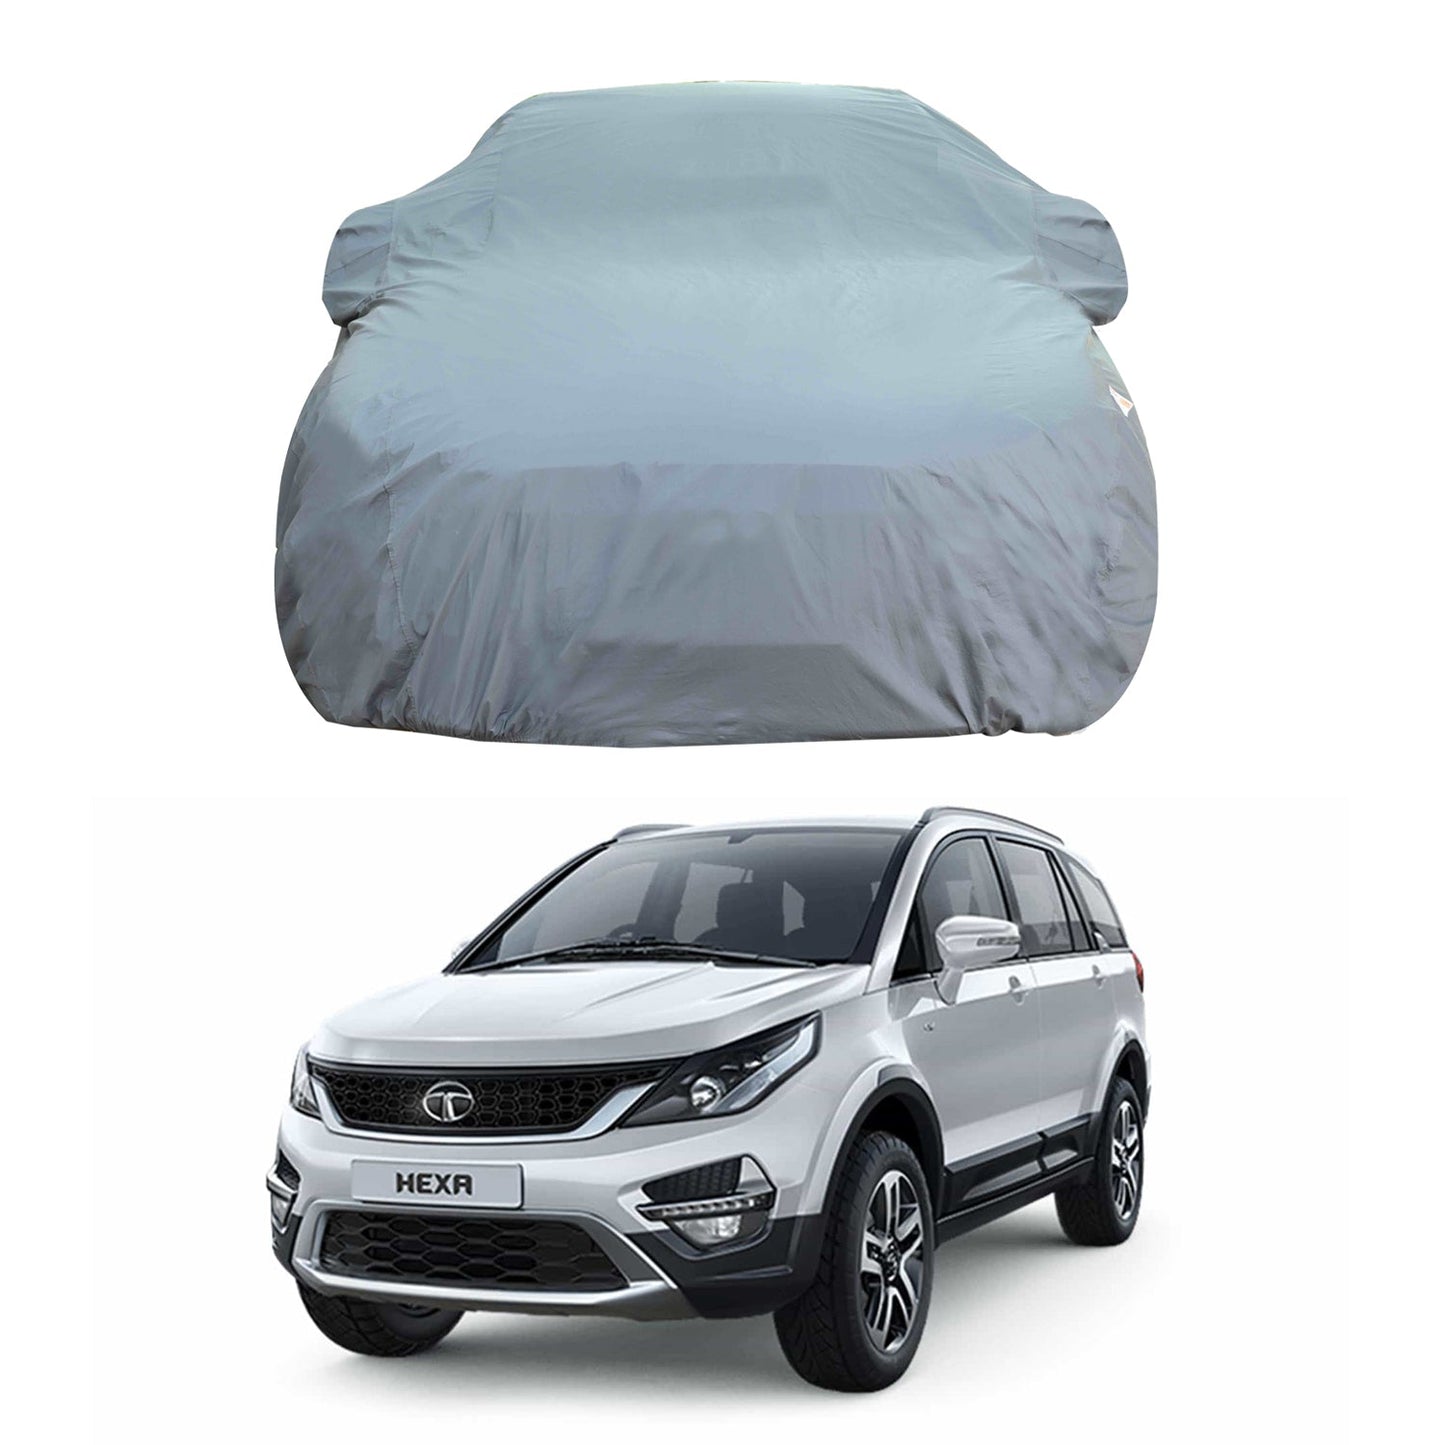 Oshotto Dark Grey 100% Anti Reflective, dustproof and Water Proof Car Body Cover with Mirror Pockets For Tata Hexa